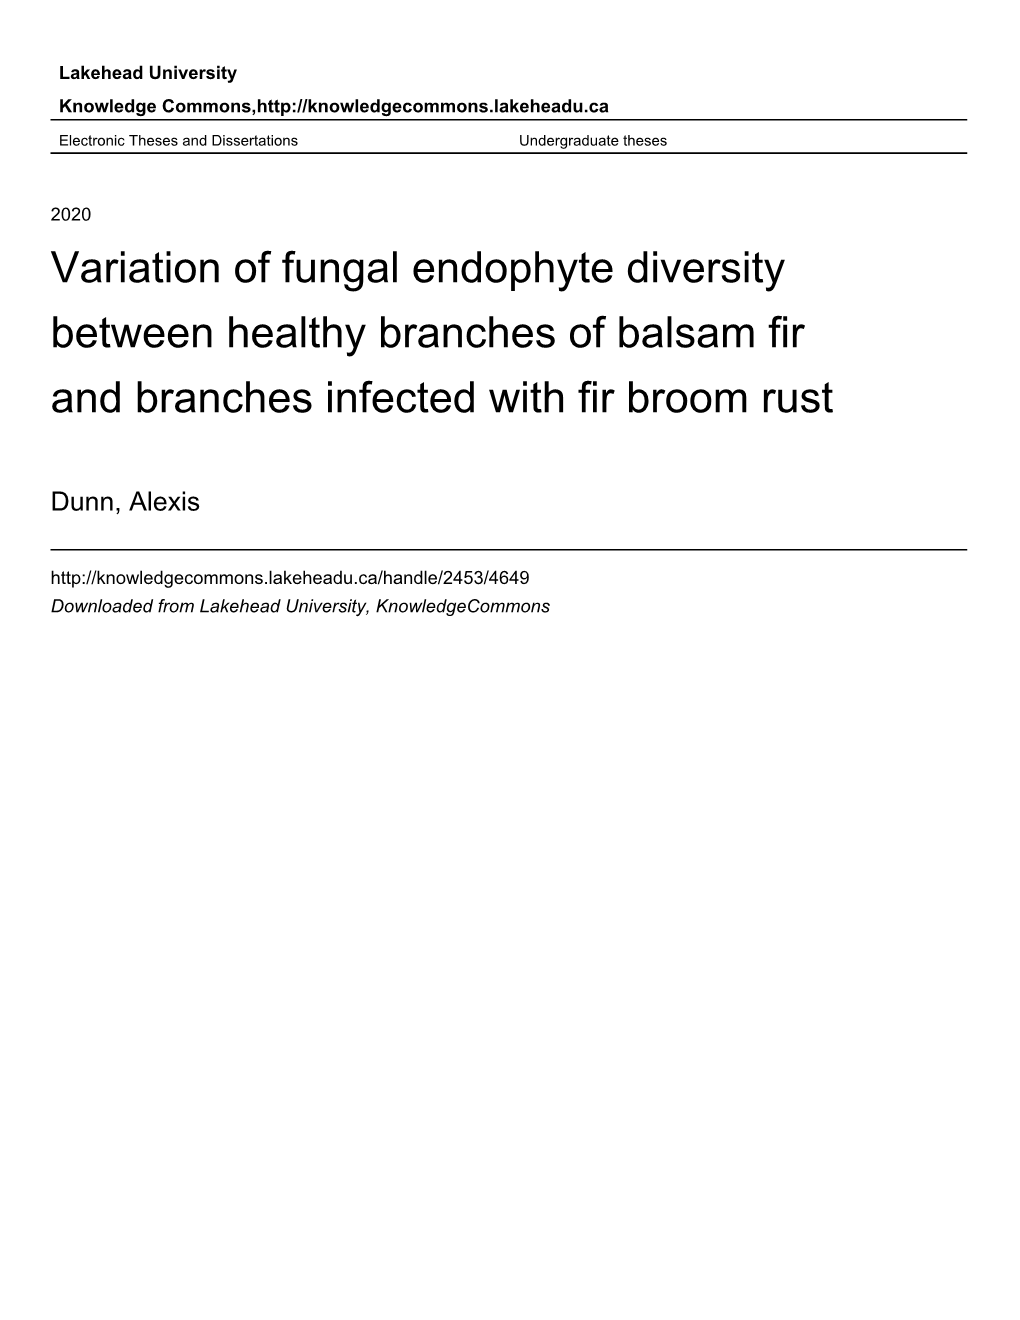 Variation of Fungal Endophyte Diversity Between Healthy Branches of Balsam Fir and Branches Infected with Fir Broom Rust